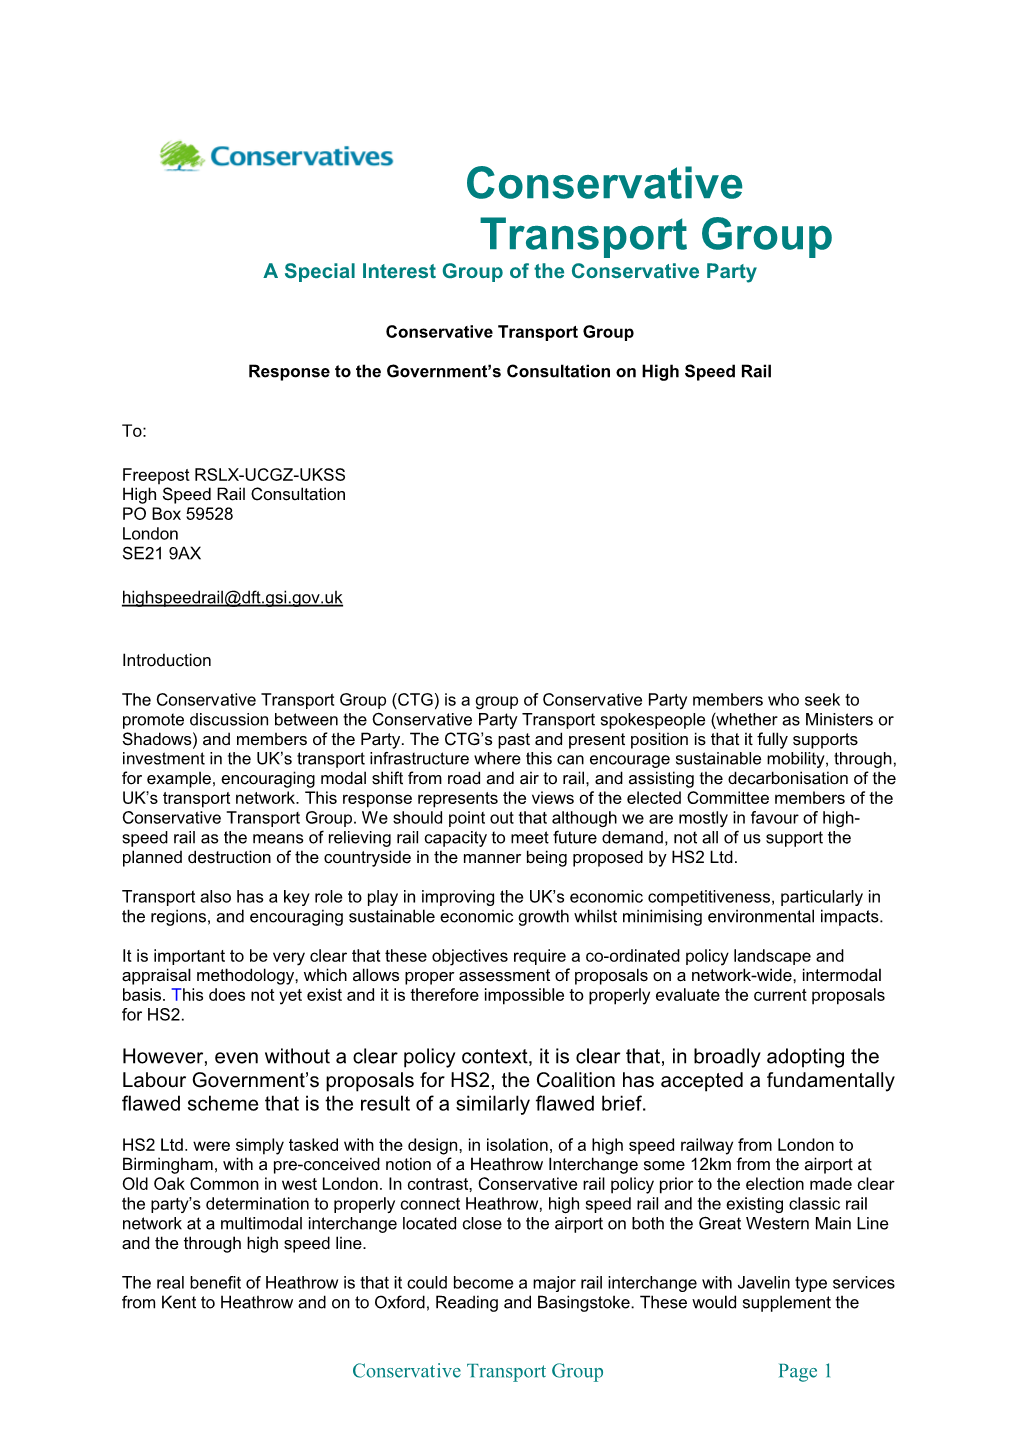 Conservative Transport Group a Special Interest Group of the Conservative Party